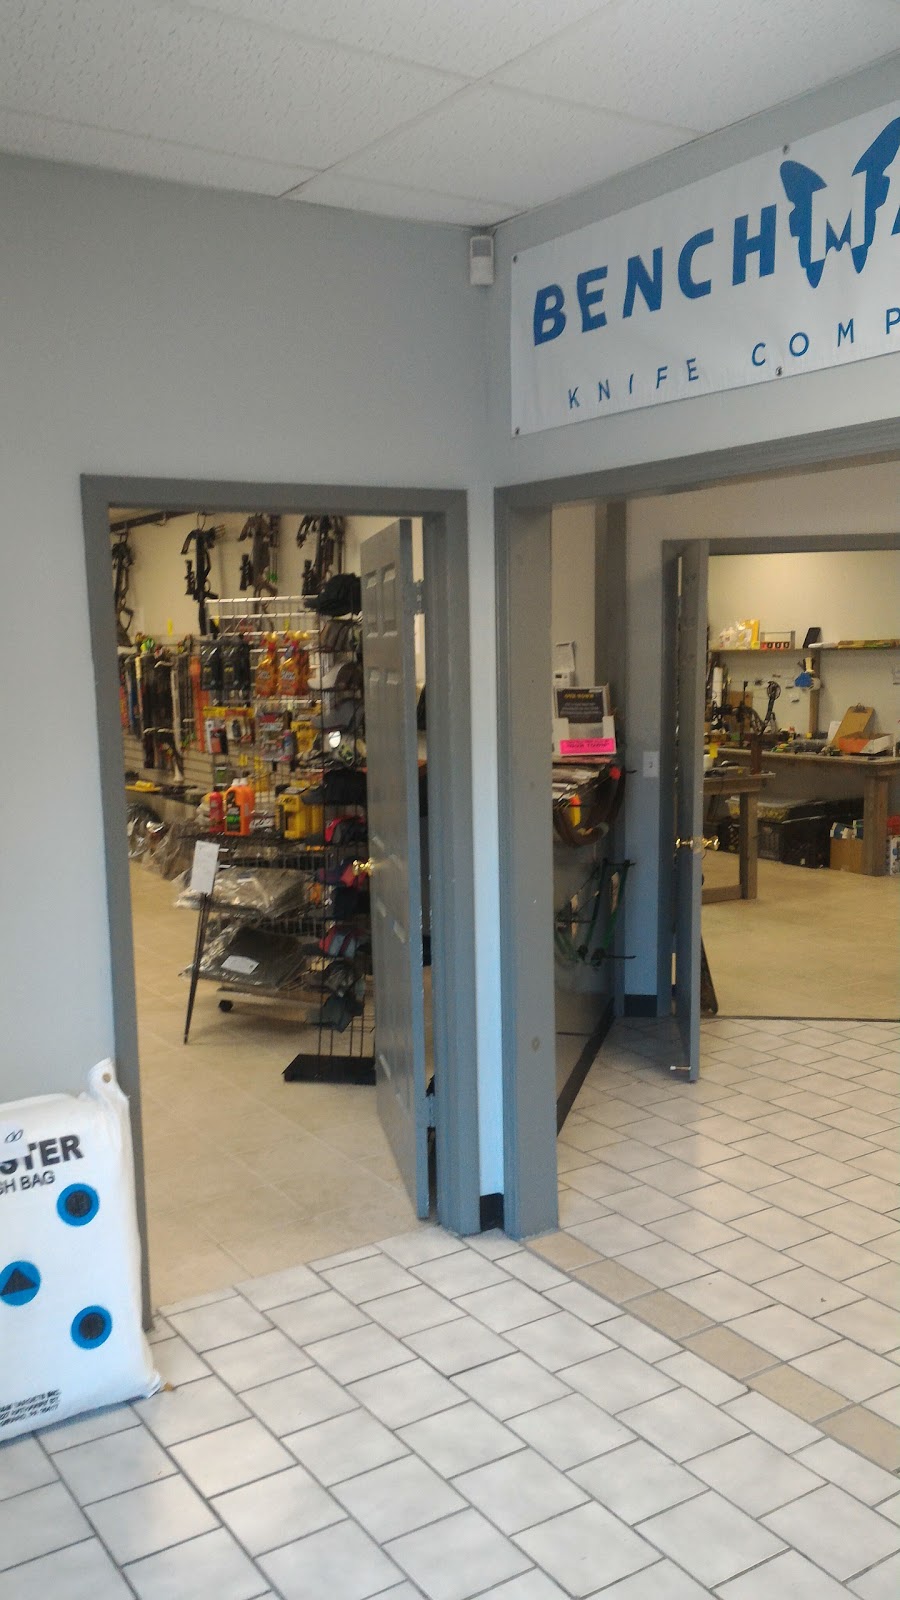 Orange County Archery Center | 1 Commercial Dr #3, Florida, NY 10921 | Phone: (845) 651-2240